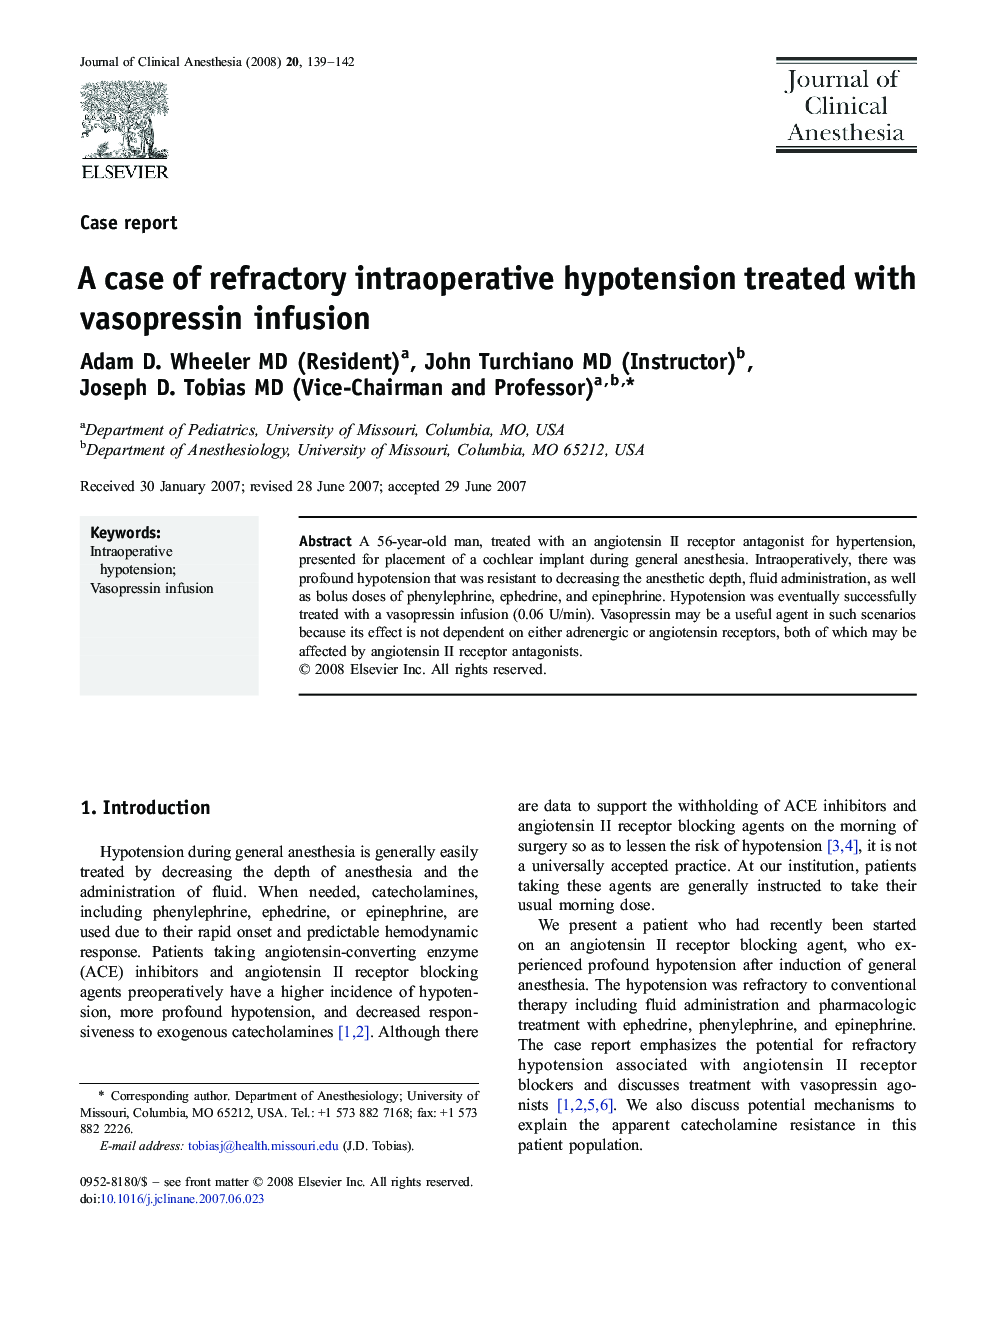 A case of refractory intraoperative hypotension treated with vasopressin infusion